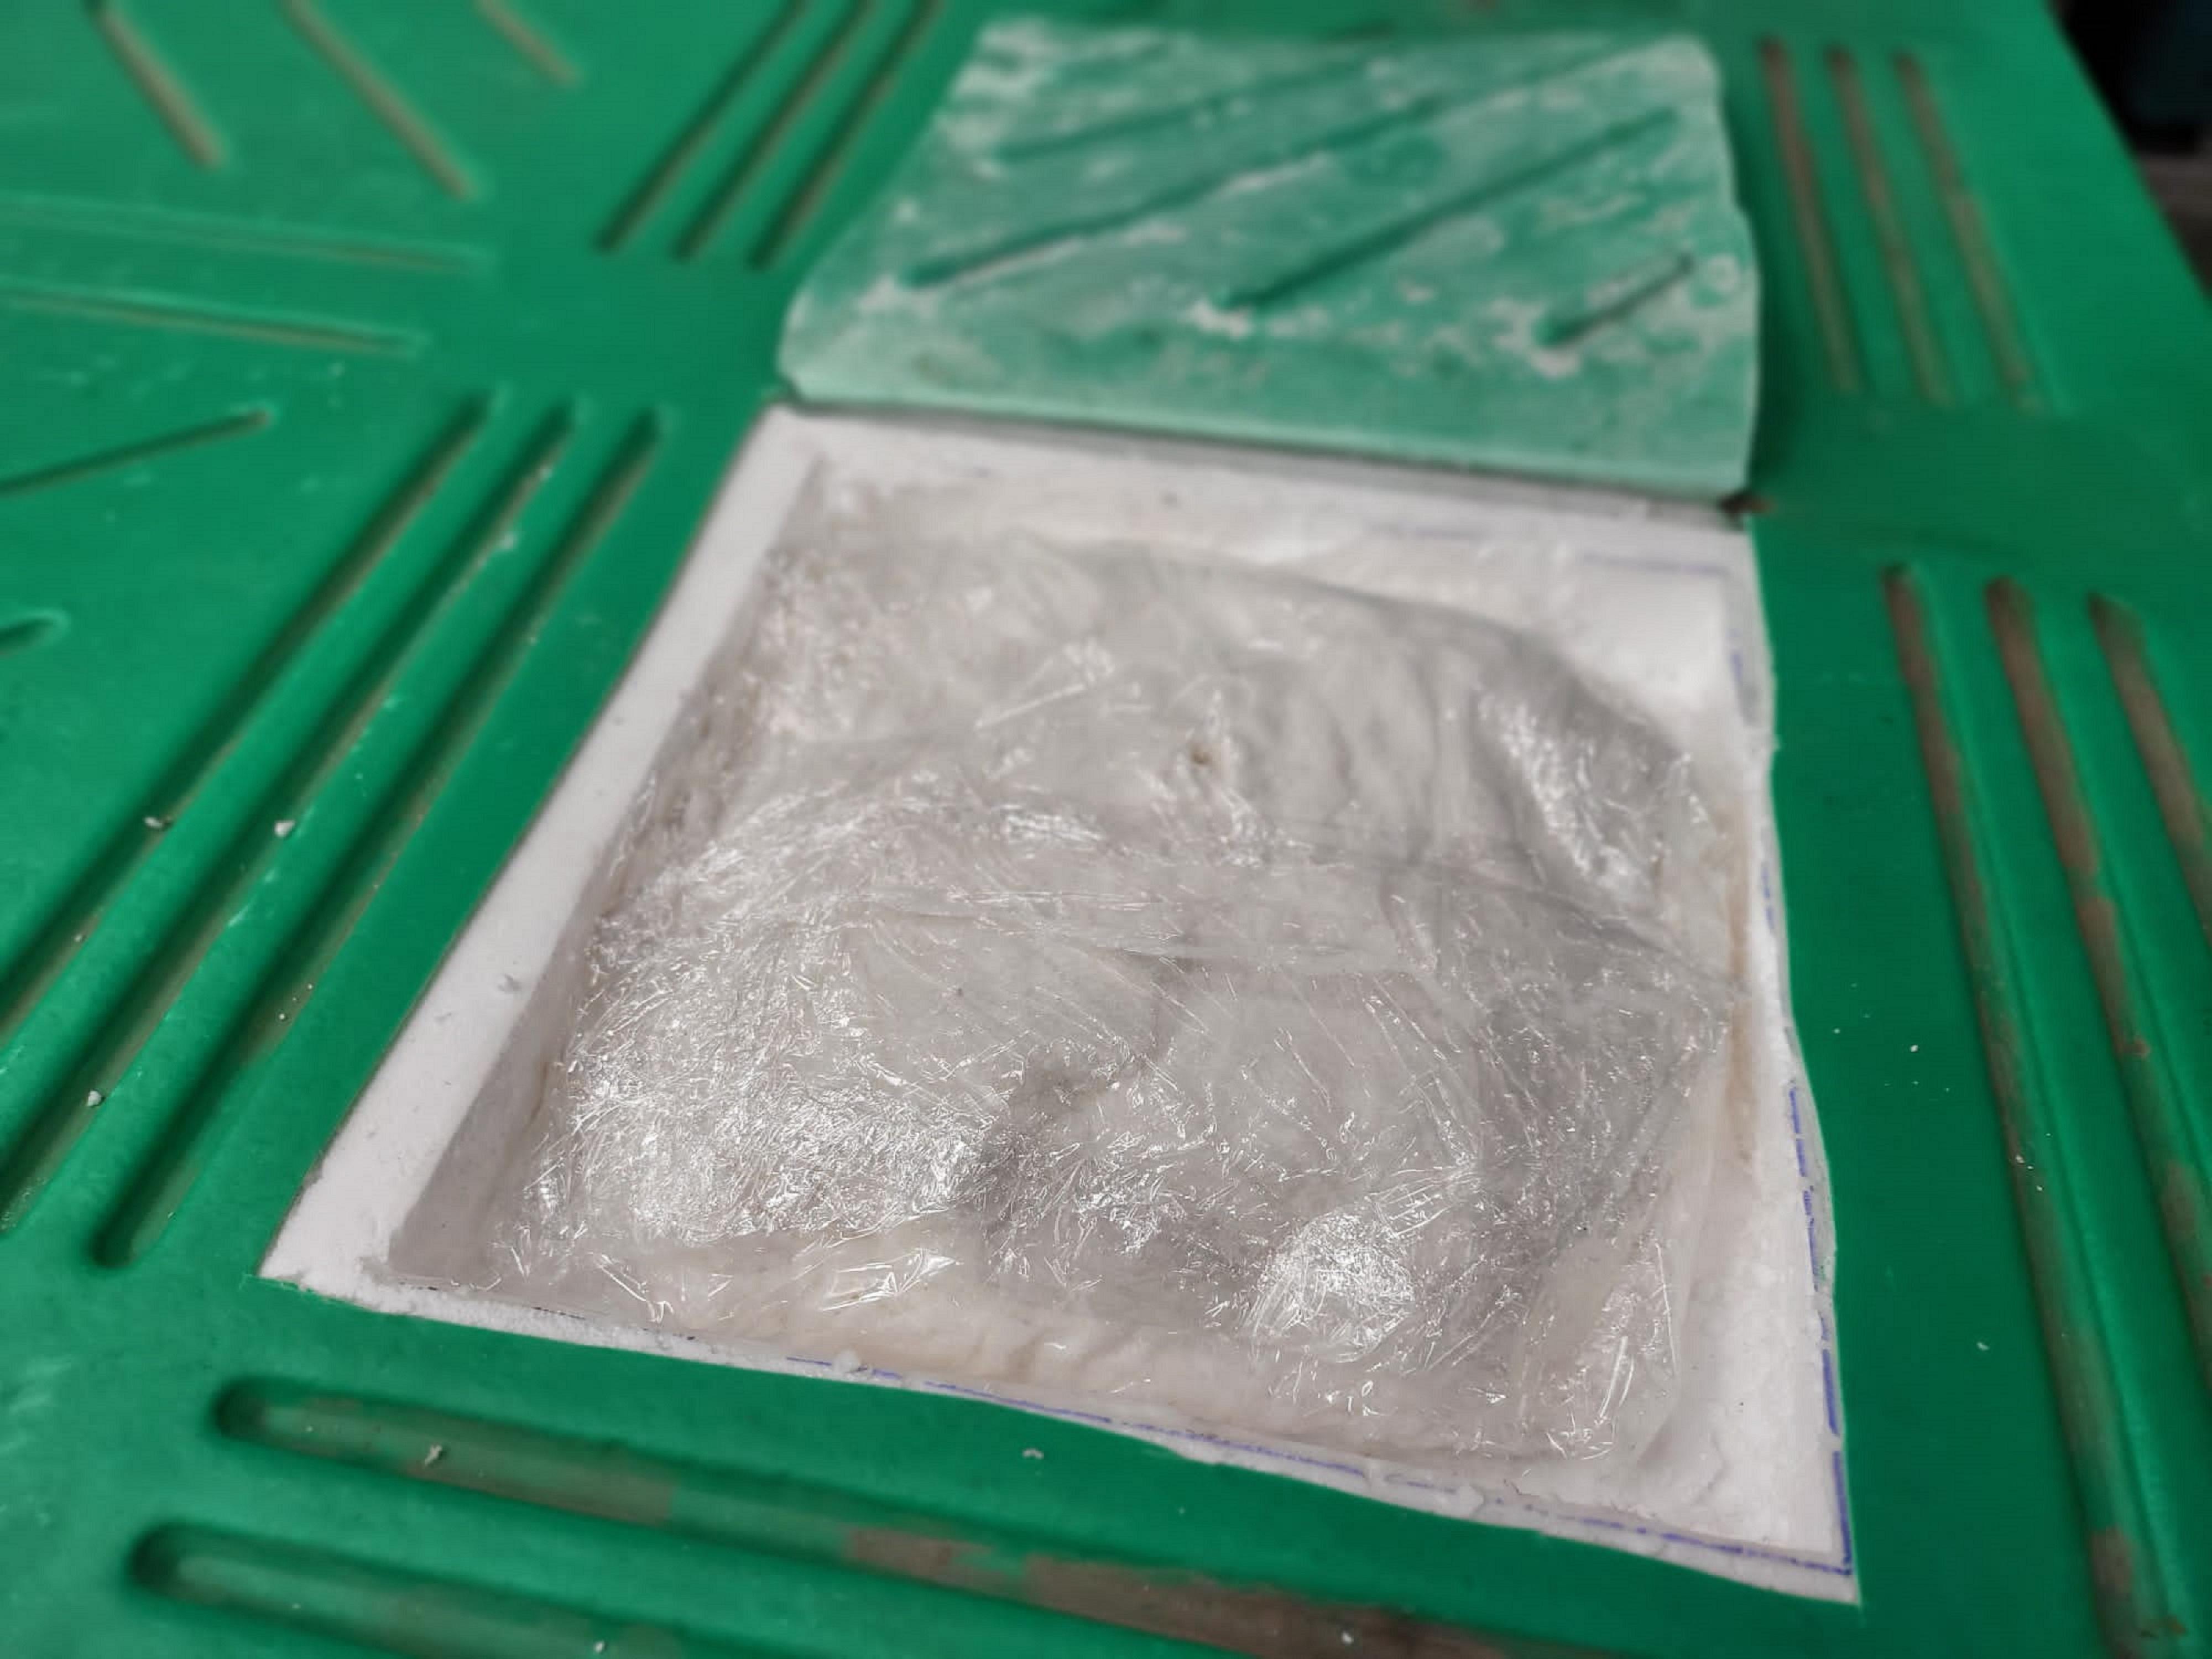 Hong Kong Customs today (October 17) seized about 11 kilograms of suspected ketamine with an estimated market value of about $6.3 million at Hong Kong International Airport. Photo shows some of the suspected ketamine concealed inside a plastic pallet.